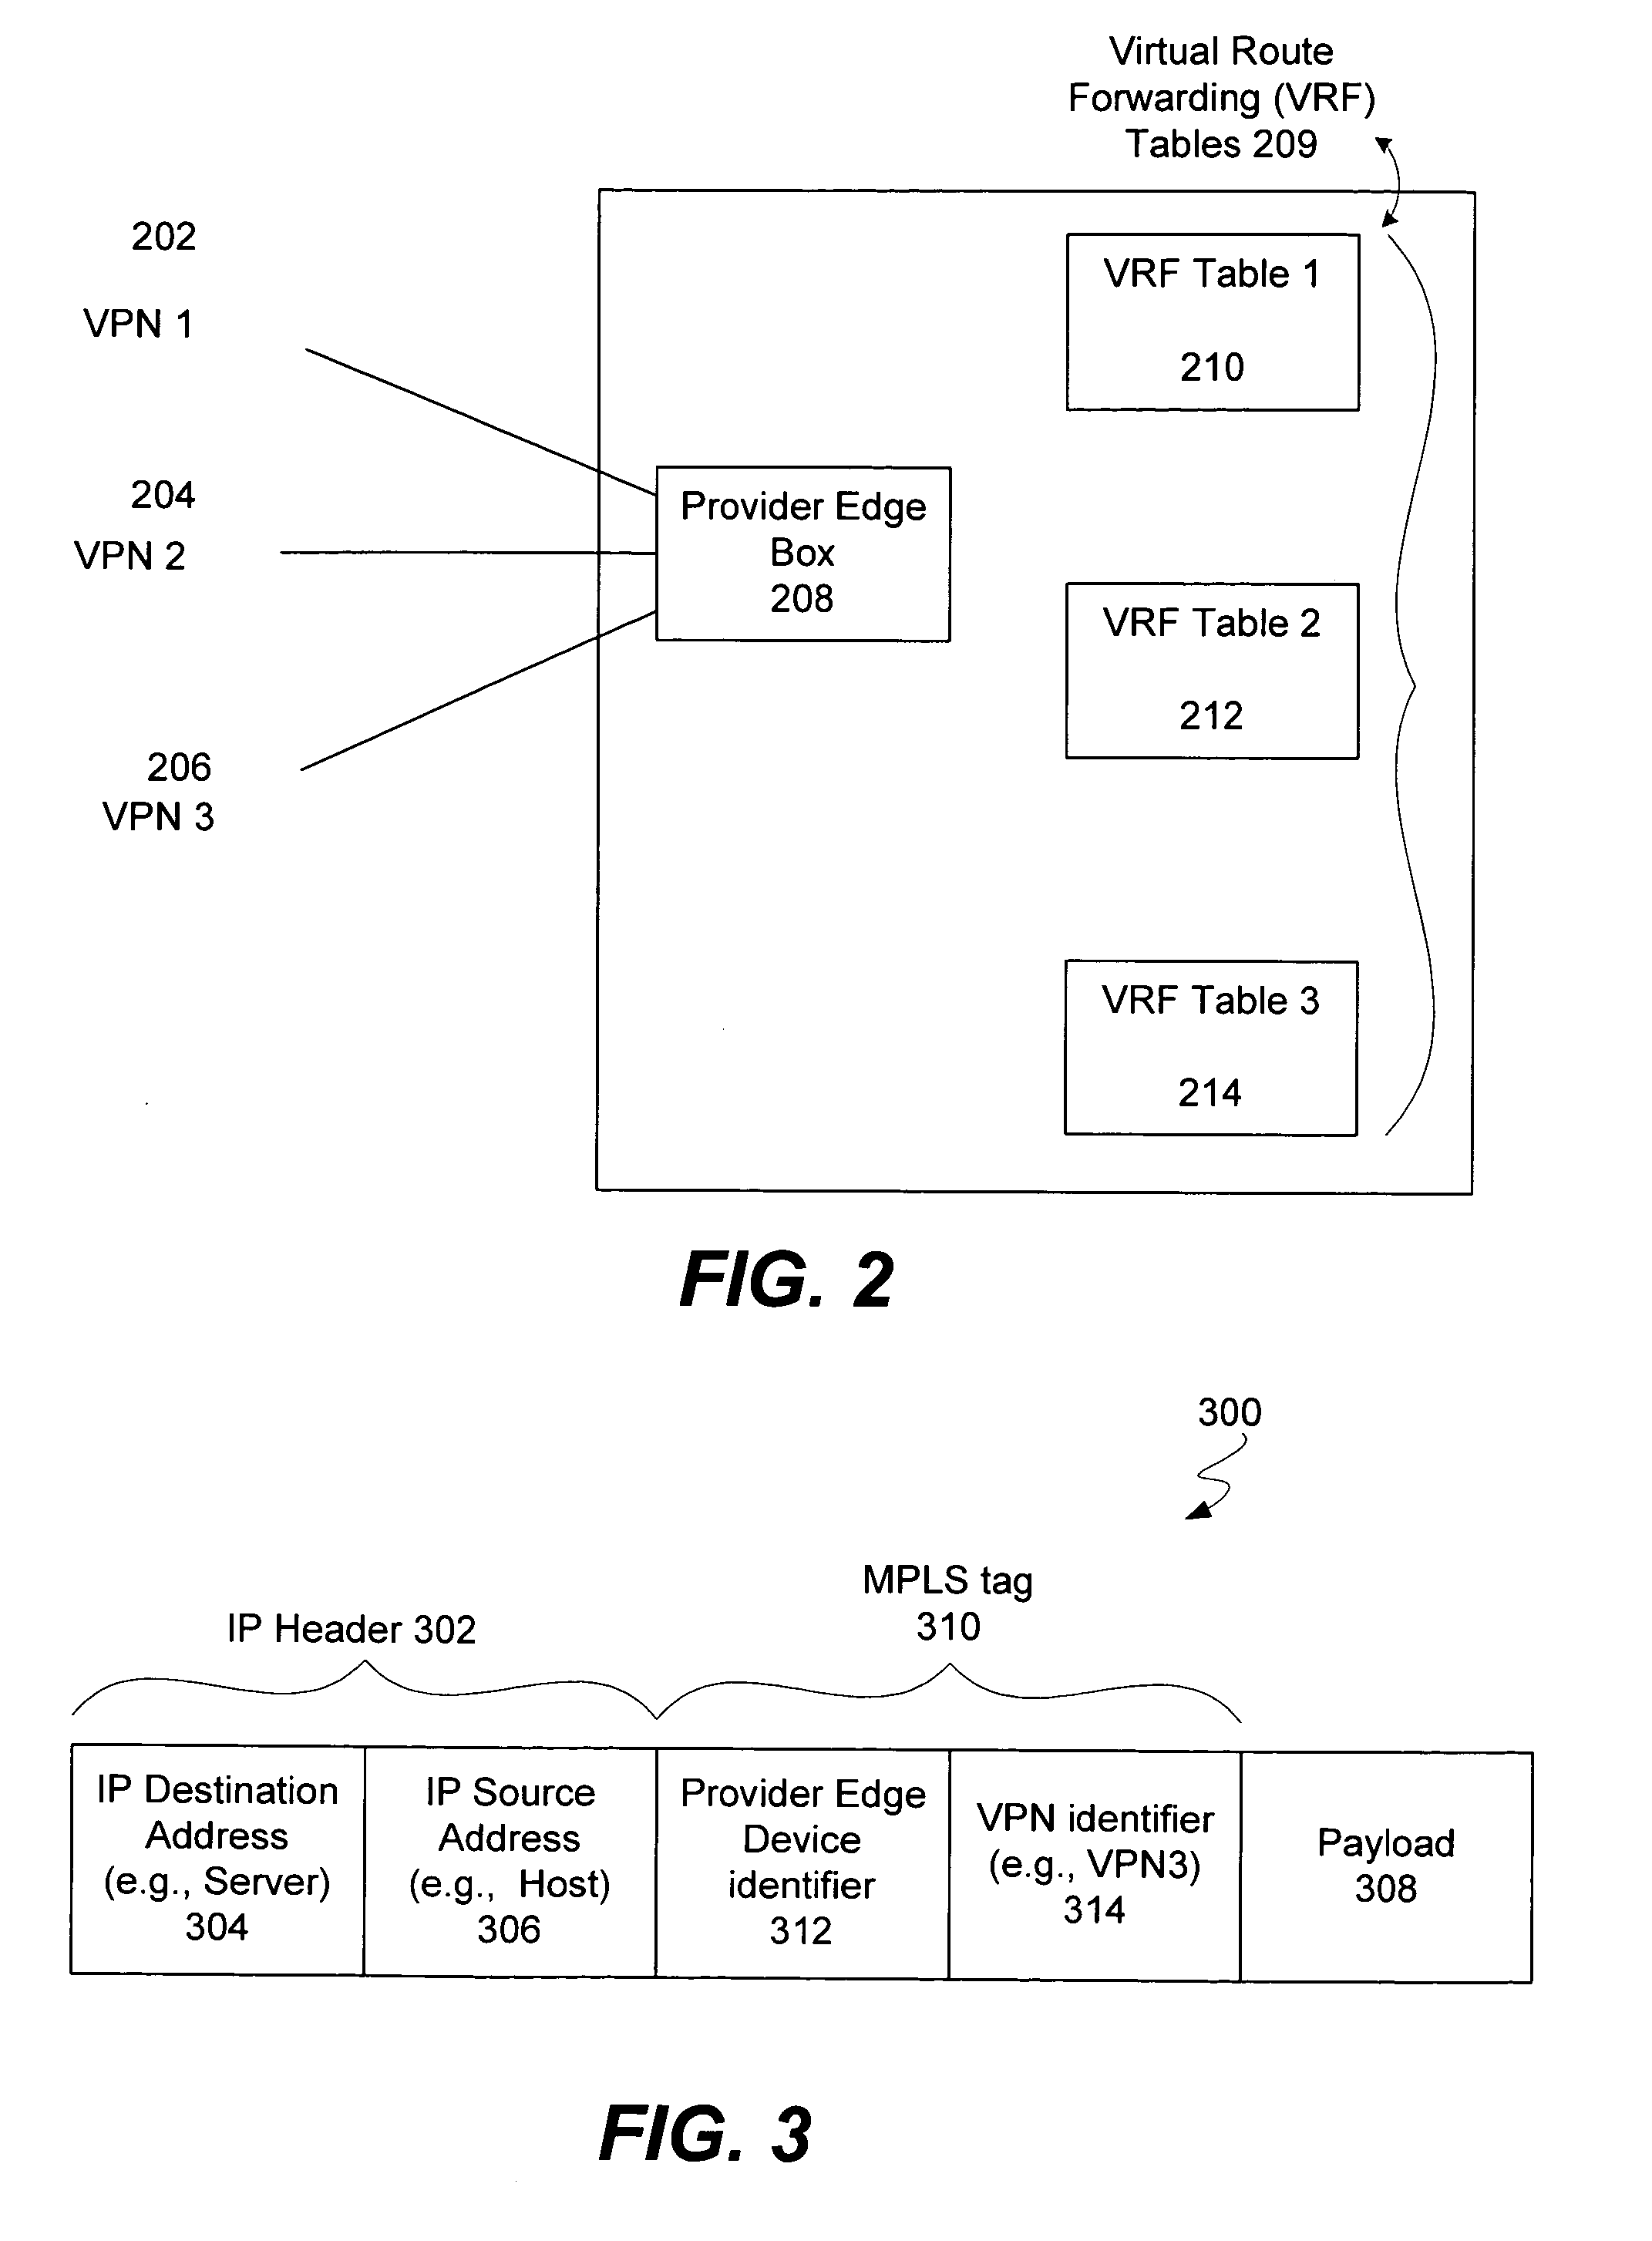 Method for constructing erasure correcting codes whose implementation requires only exclusive ORs